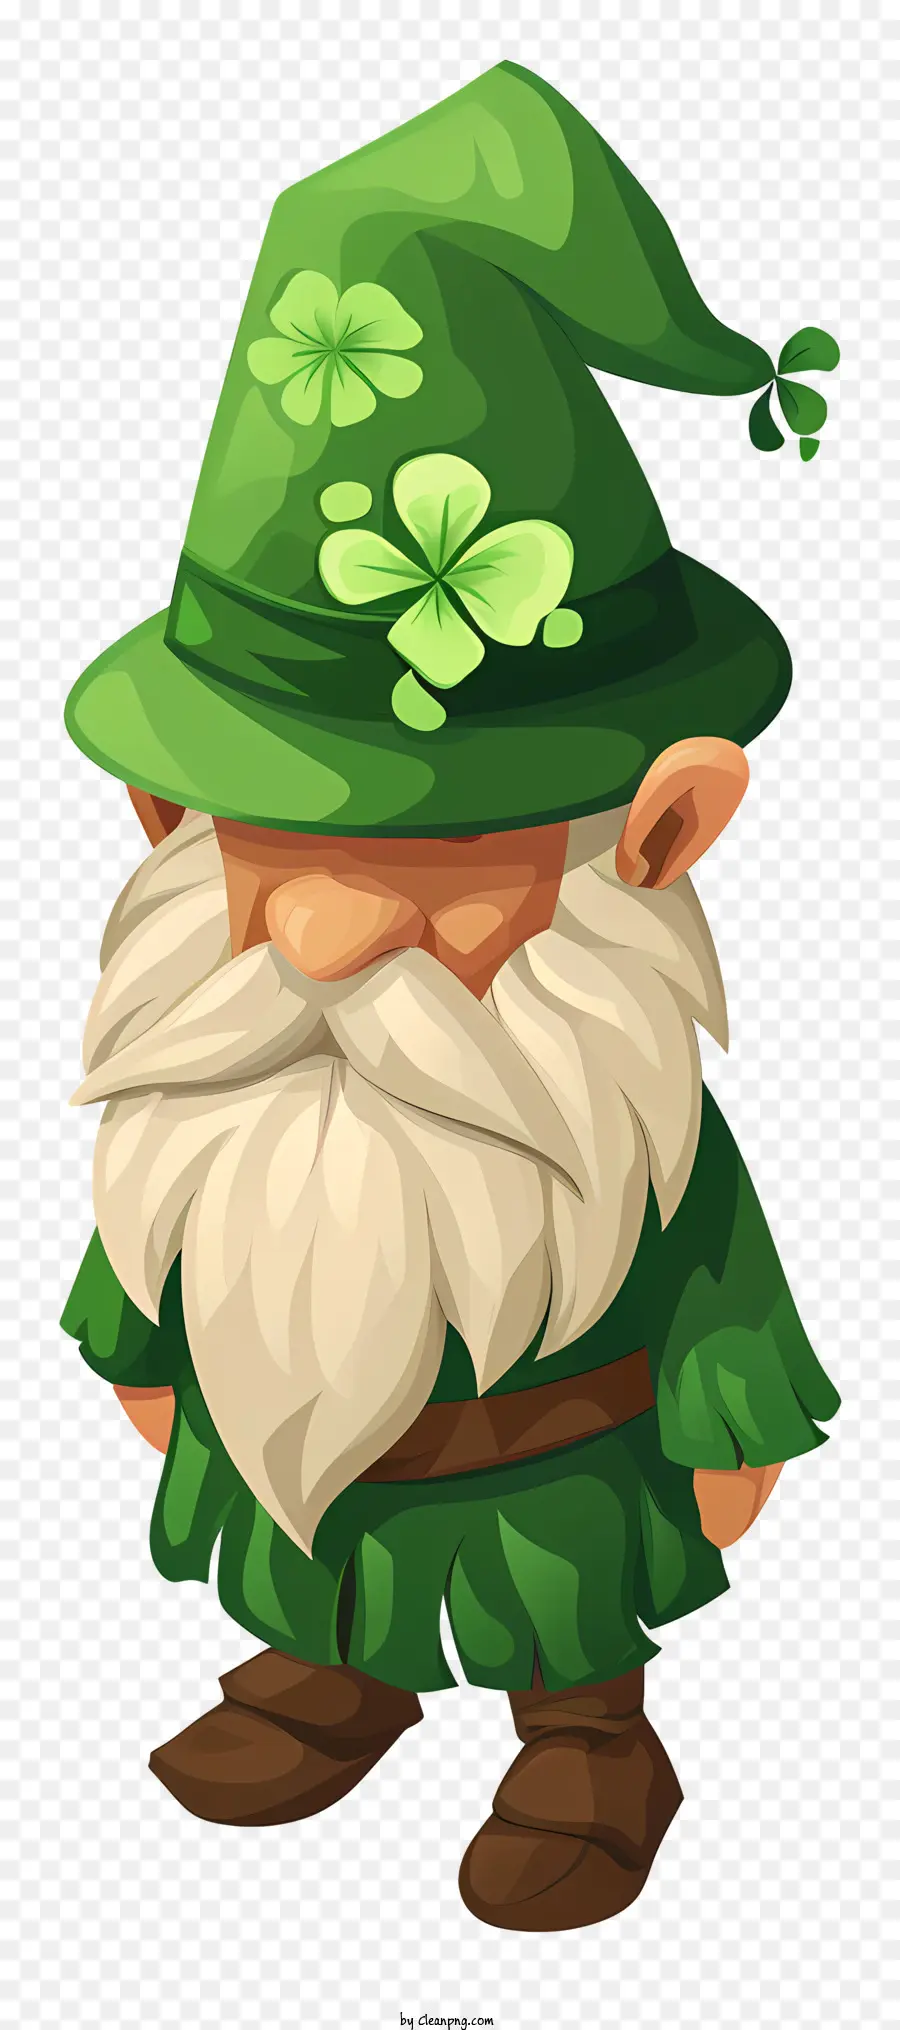 st patric's day gnome cartoon gnome green outfit clover hat arms crossed